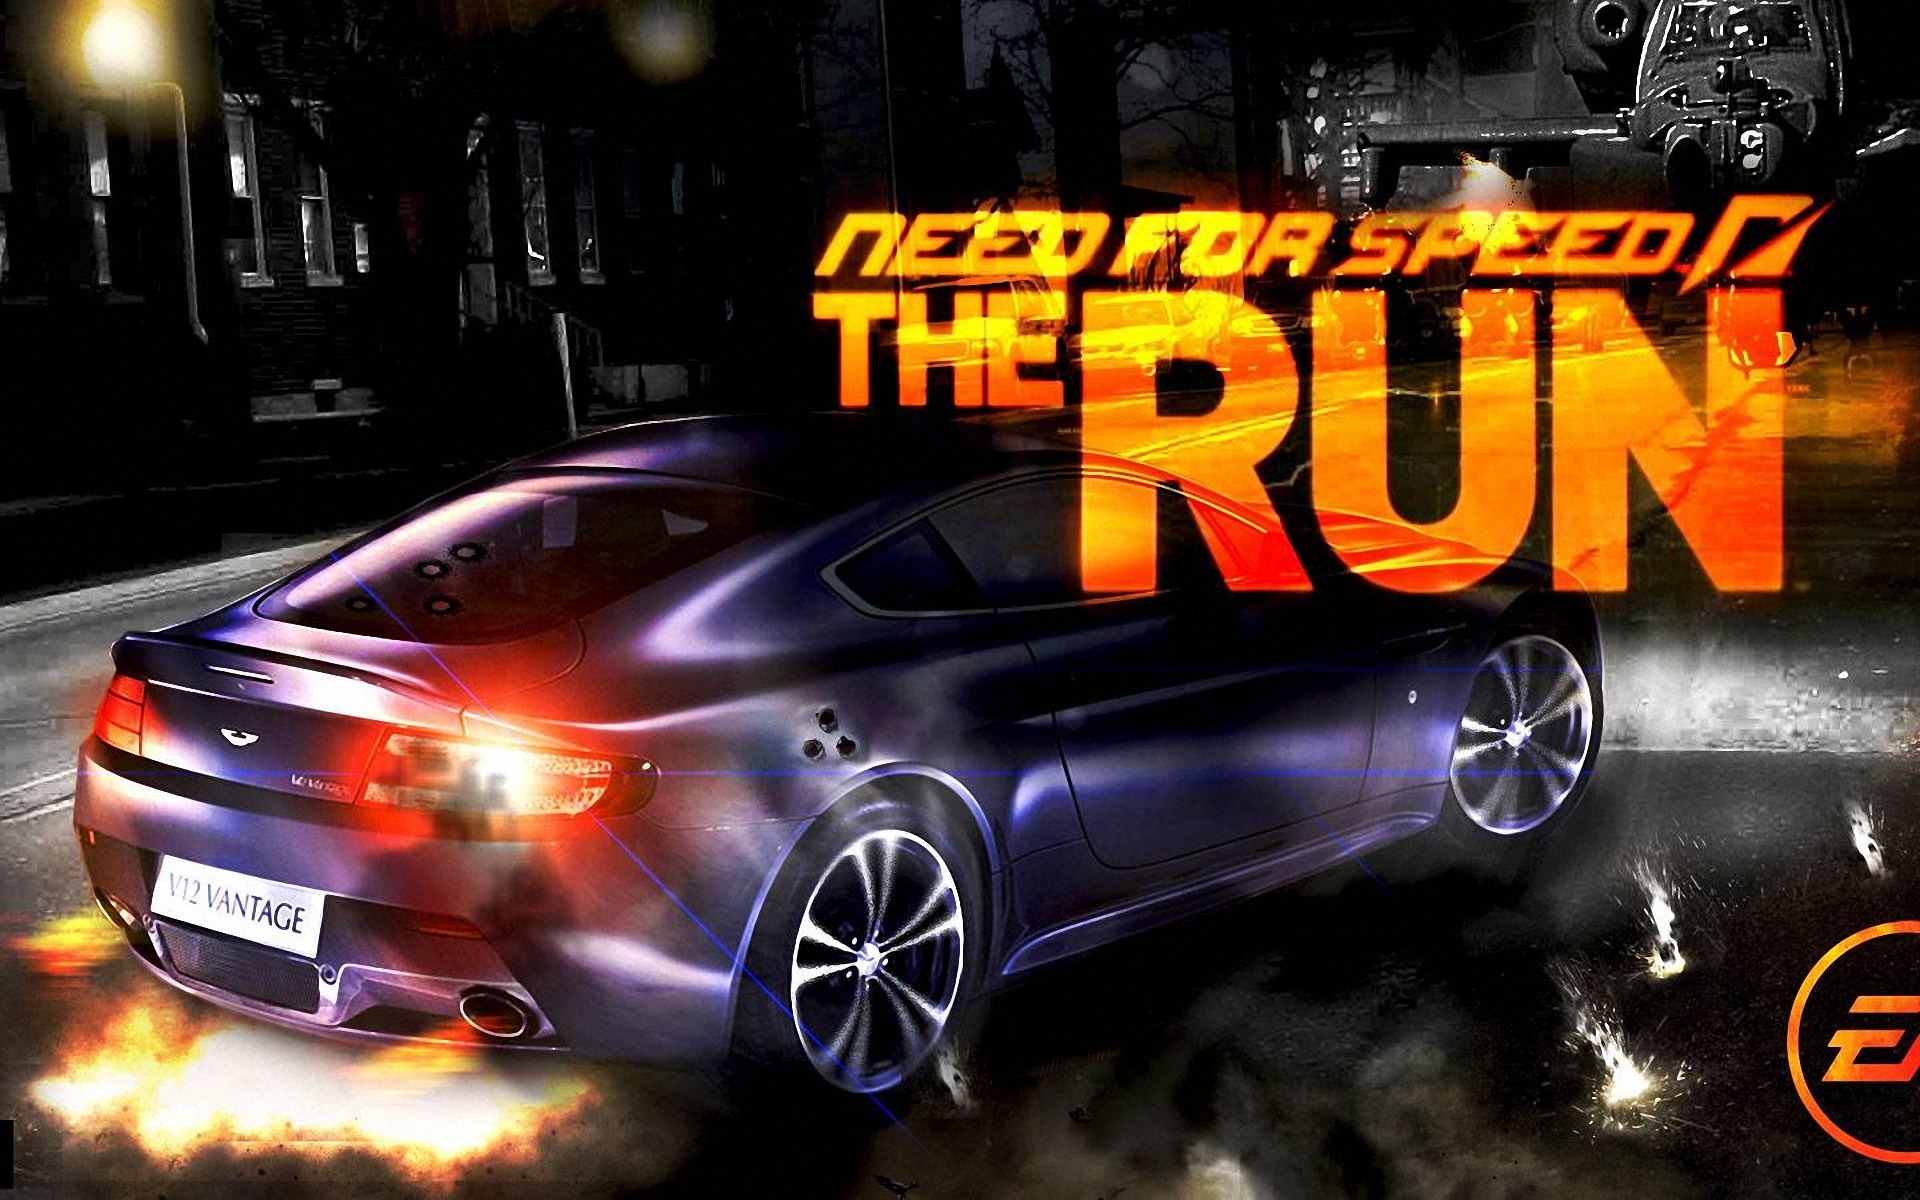 Need for Speed: The Run HD wallpapers #14 - 1920x1200